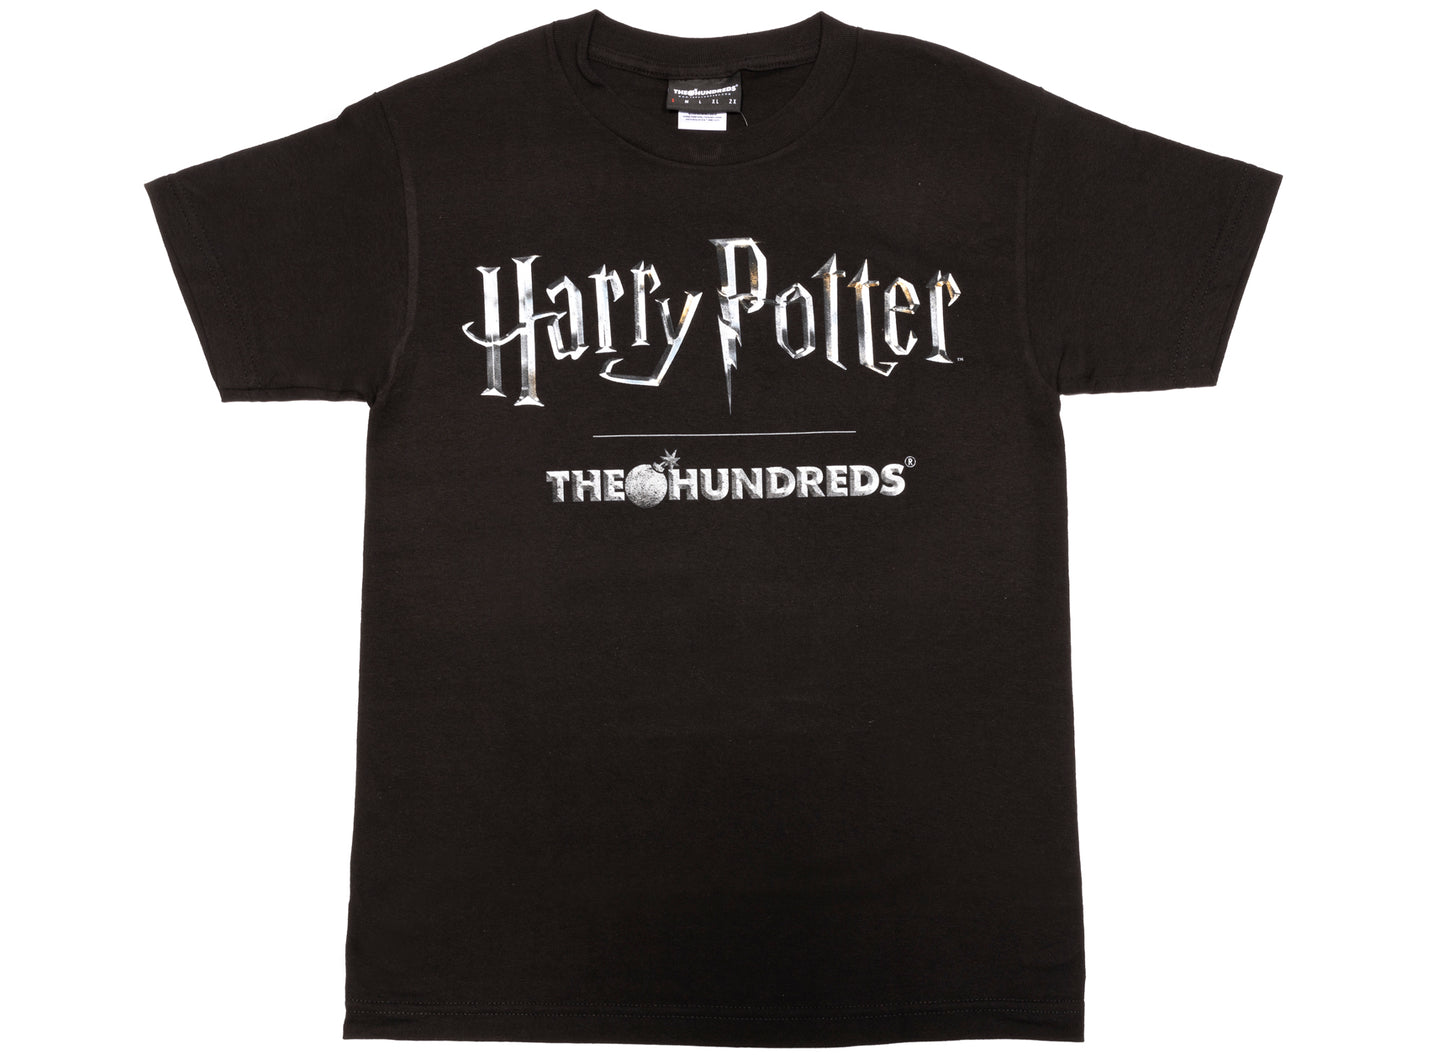 The Hundreds x Harry Potter Title Tee